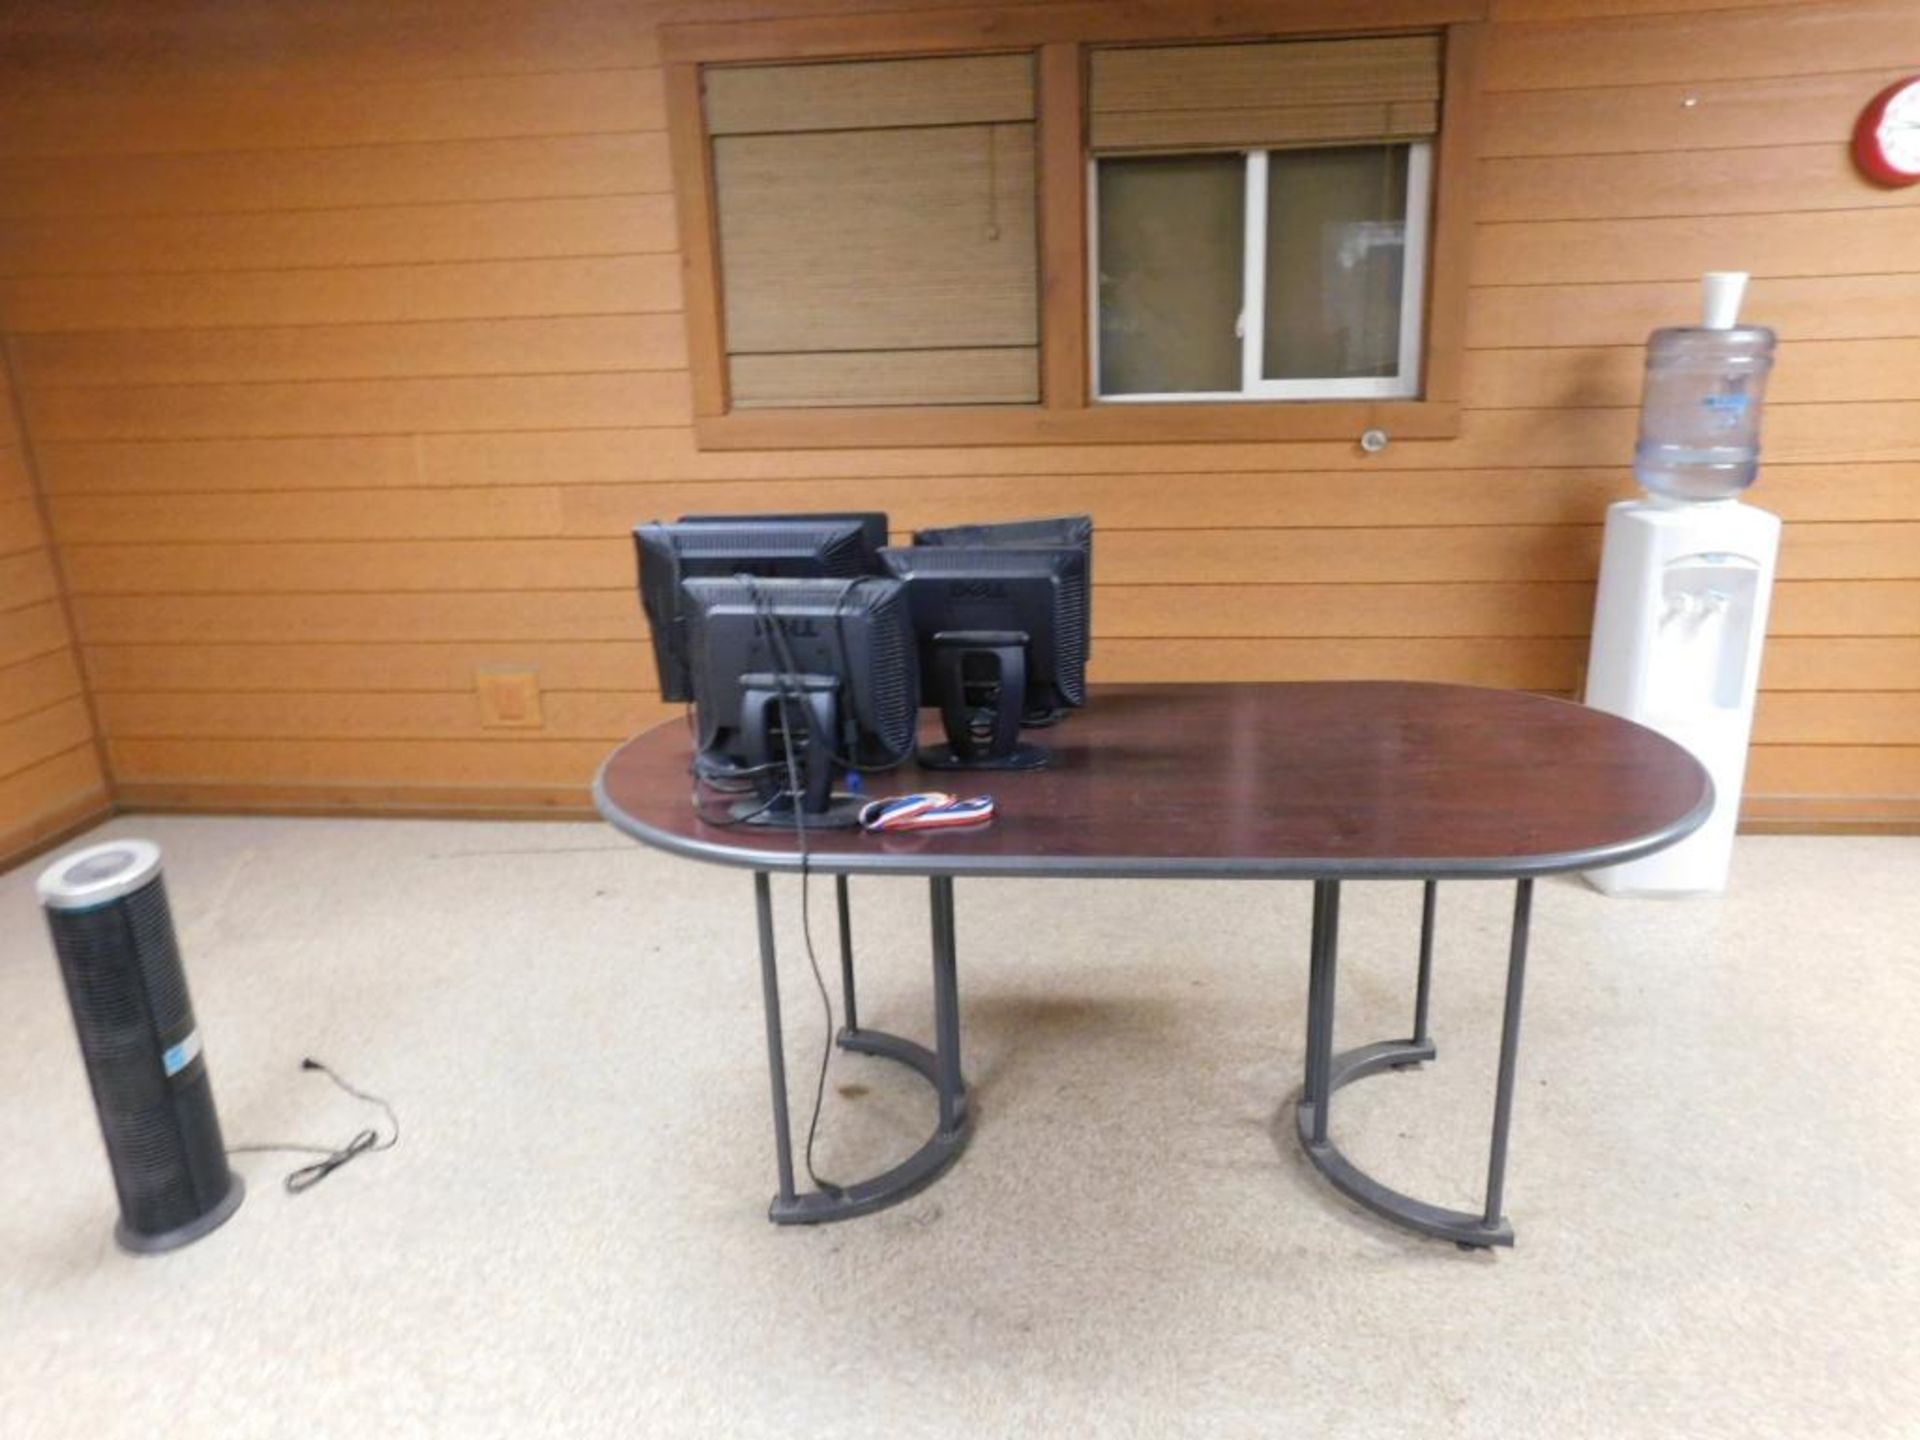 LOT: Contents of Offices: Desks, Chairs, File Cabinets, Monitors (NO TOWERS OR PRINTERS) - Image 10 of 11